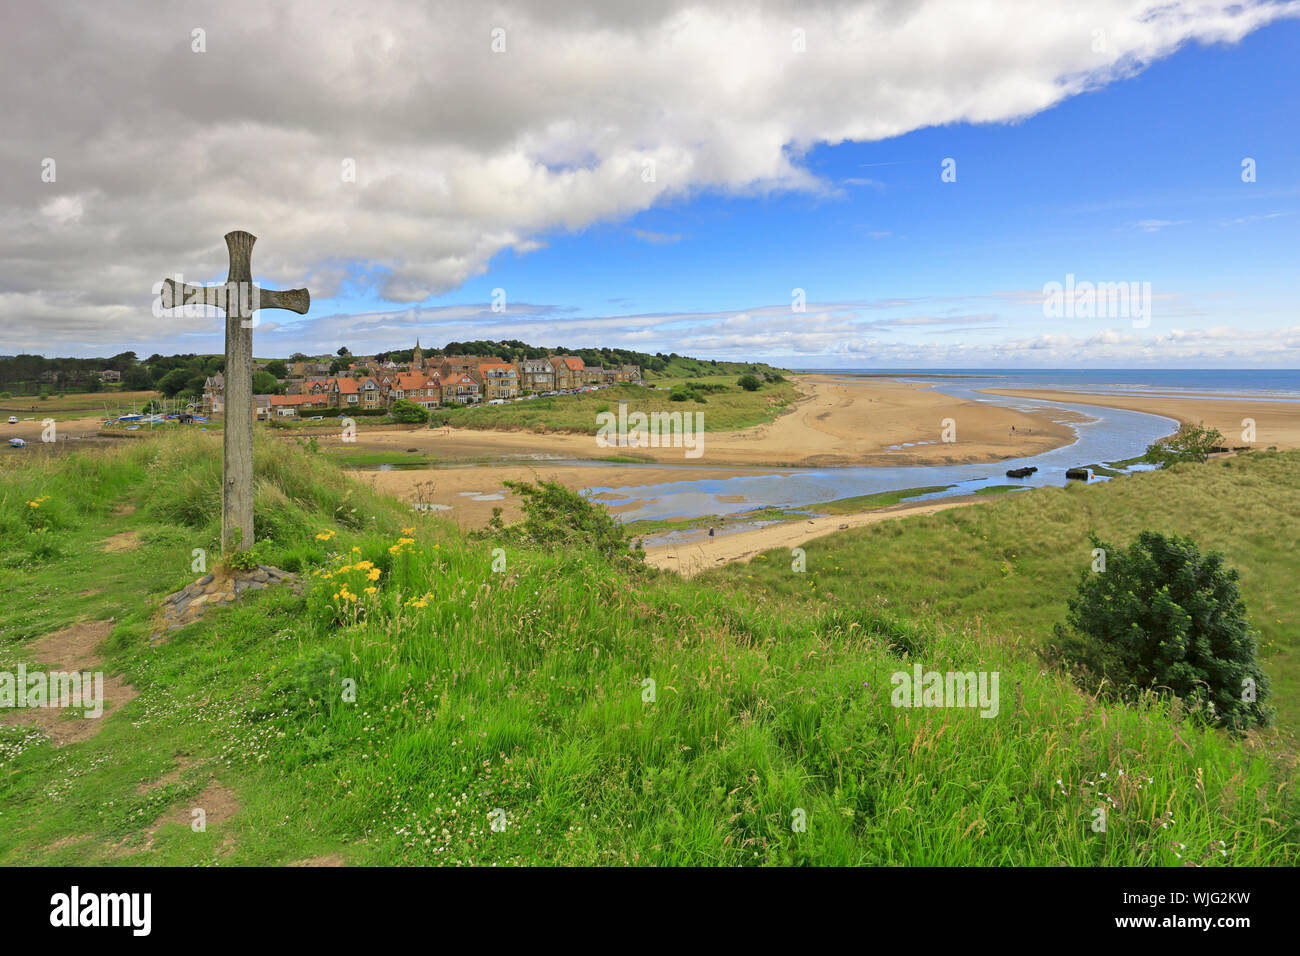 St Cuthberts Cross on Church Hill overlooking the River Aln estuary and Alnmouth, Northumberland, England, UK. Stock Photo